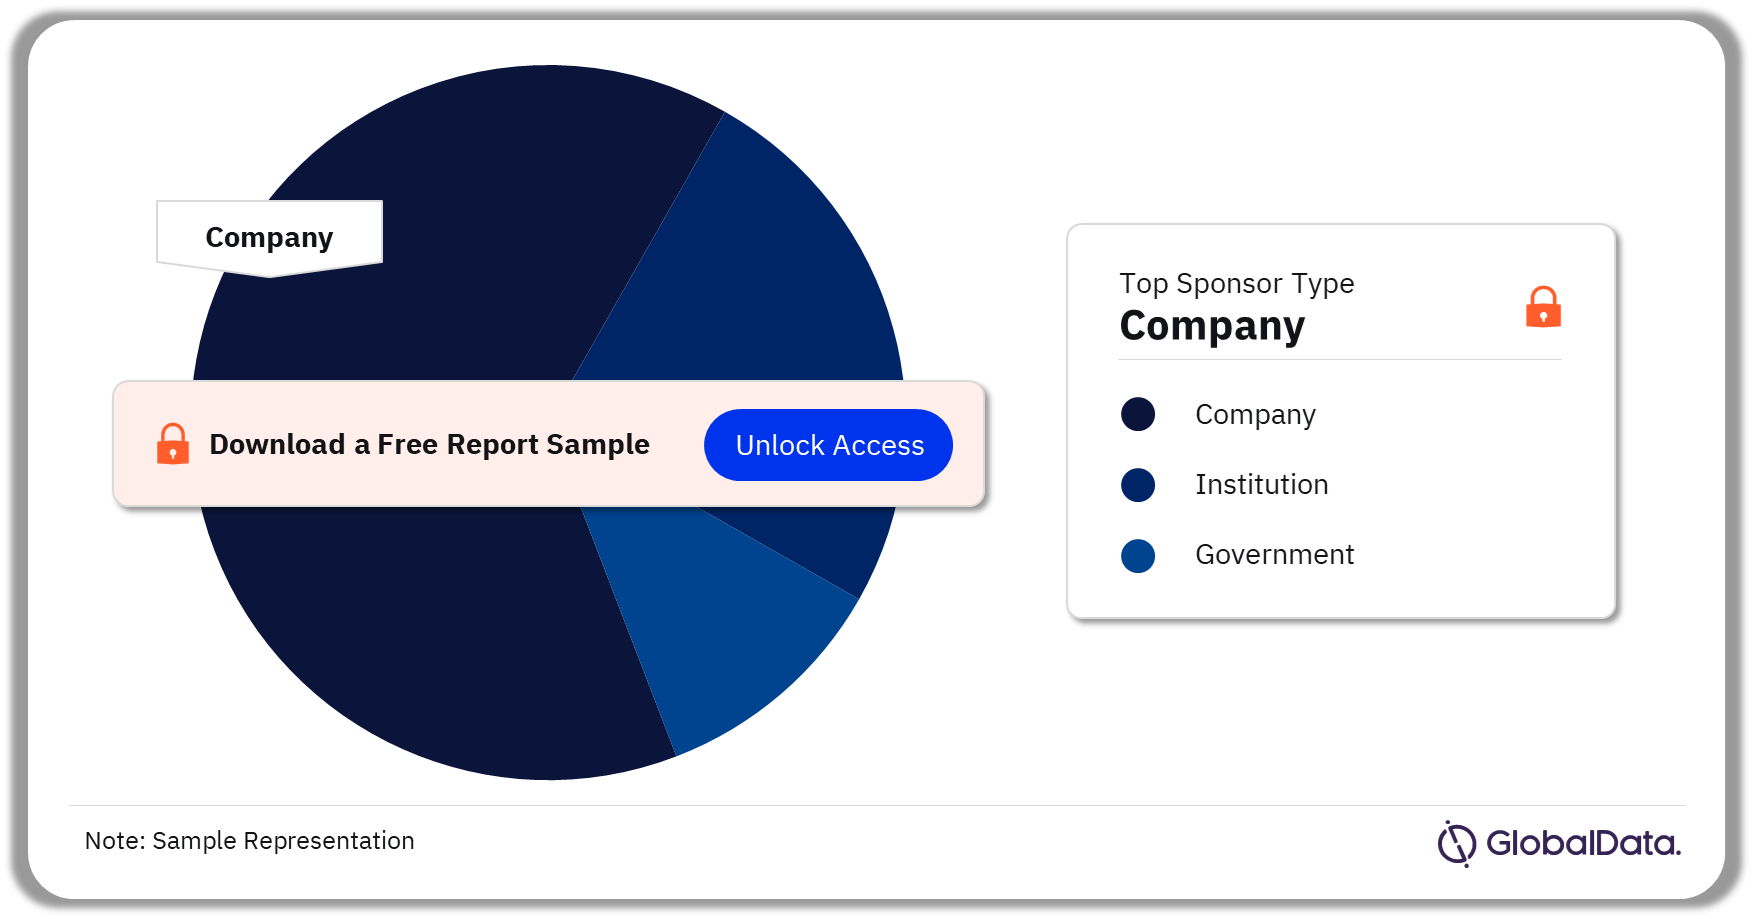 Ulcerative Colitis Clinical Trials Market Analysis by Sponsor Types, 2023 (%)